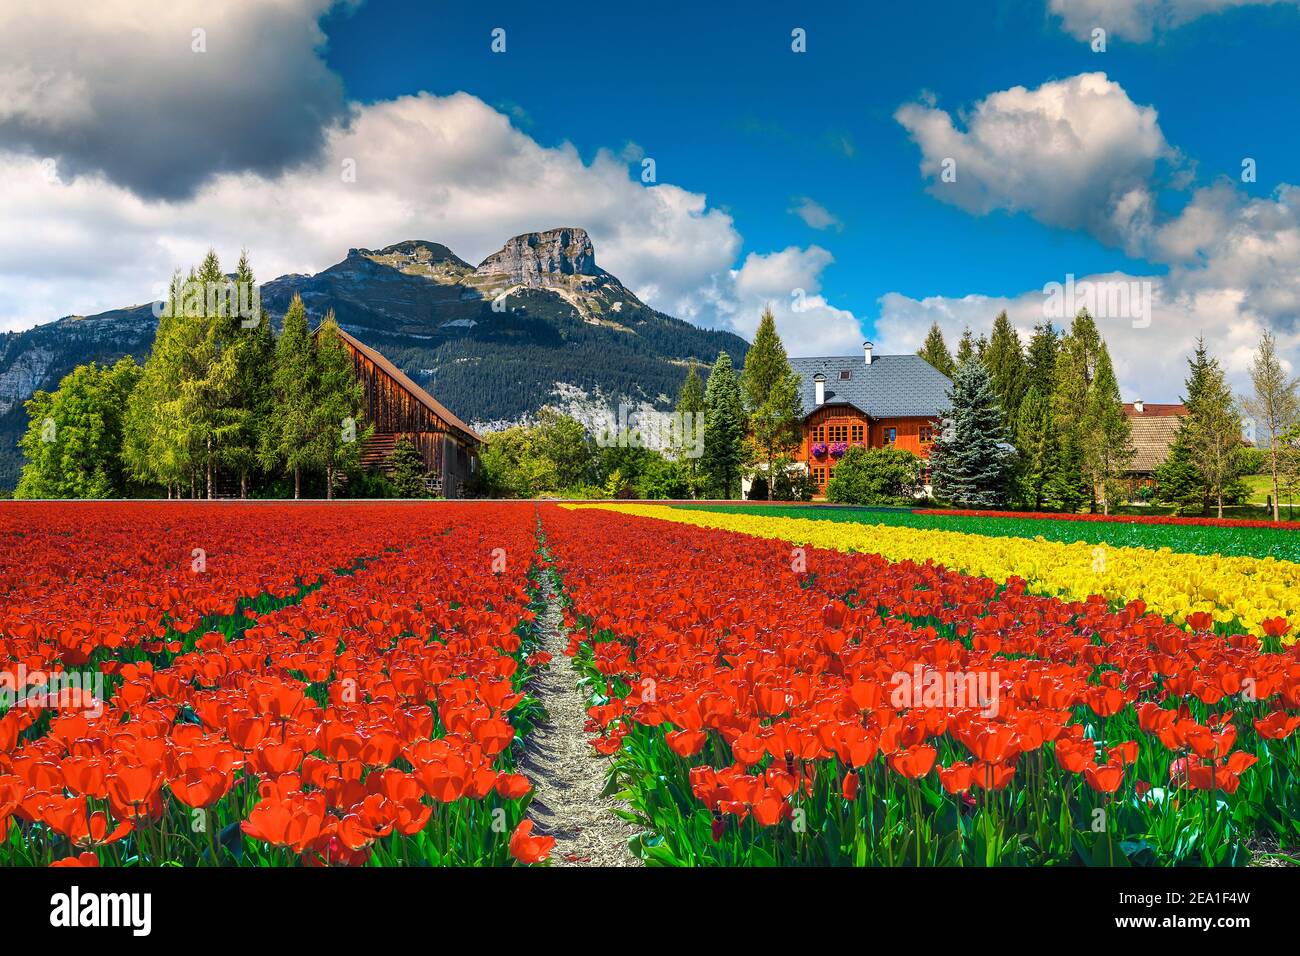 Admirable spring countryside landscape with colorful various tulip plantations. Seasonal flowery fields and rocky mountains in background, Austria, Eu Stock Photo